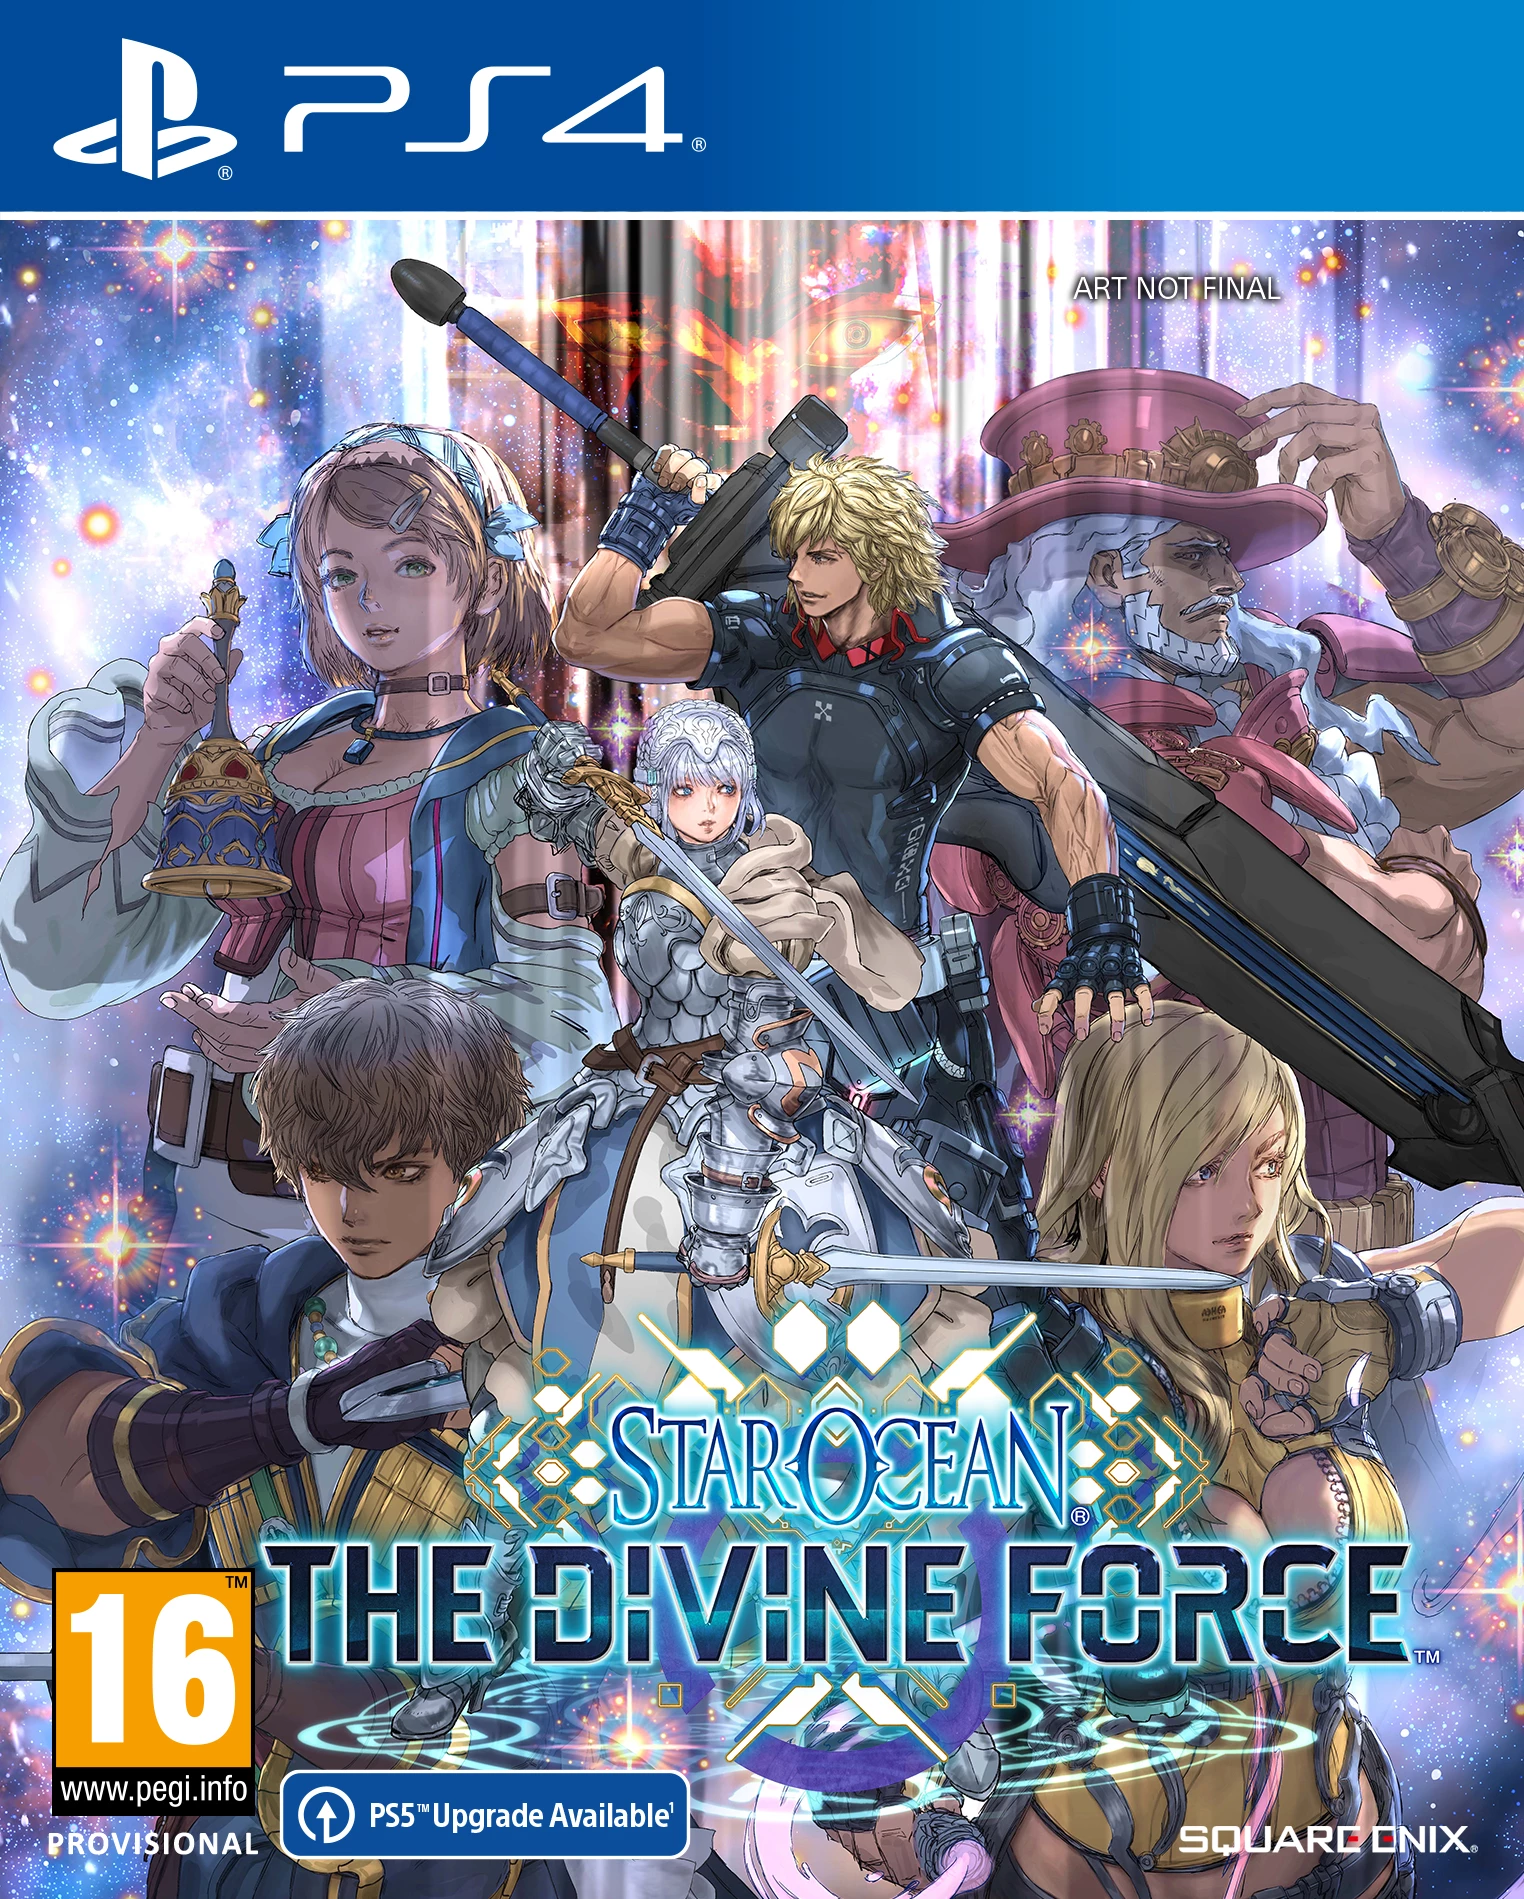 Star Ocean: The Divine Force (PS4), Square Enix